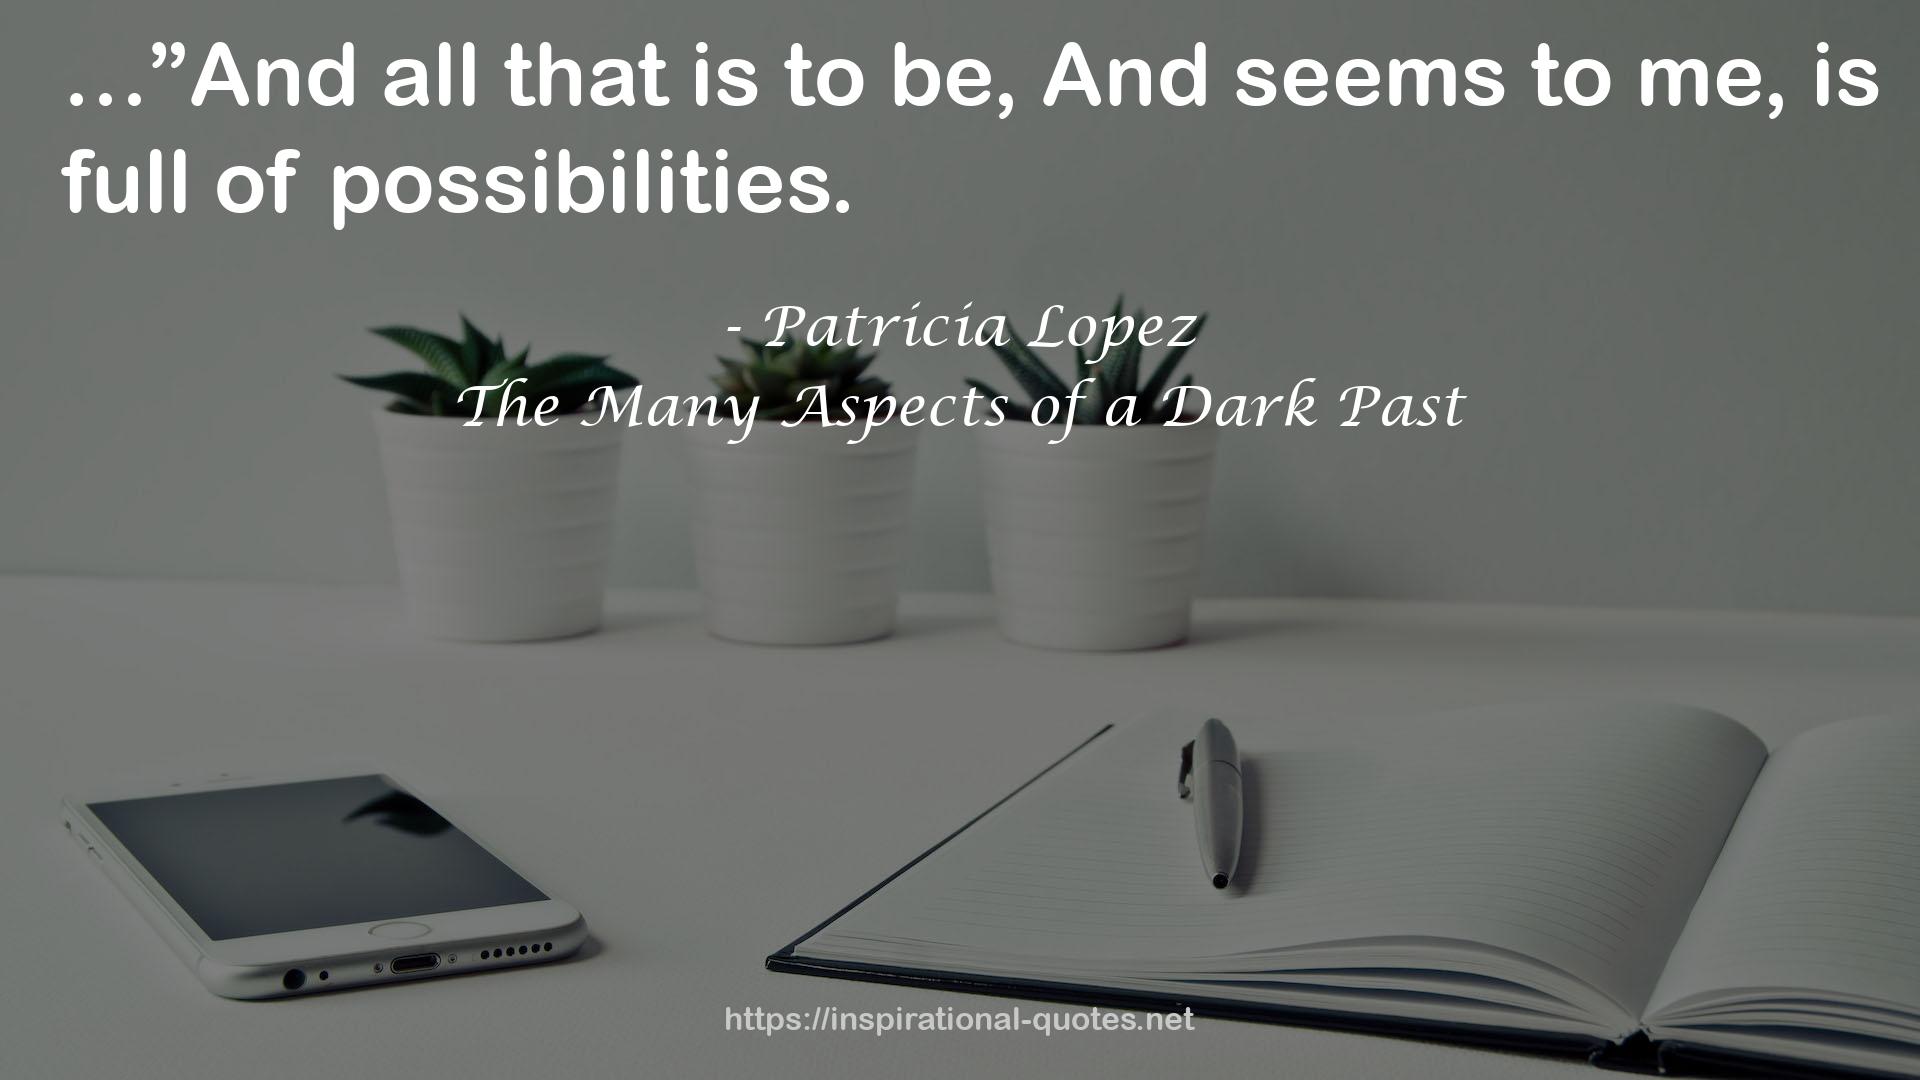 The Many Aspects of a Dark Past QUOTES